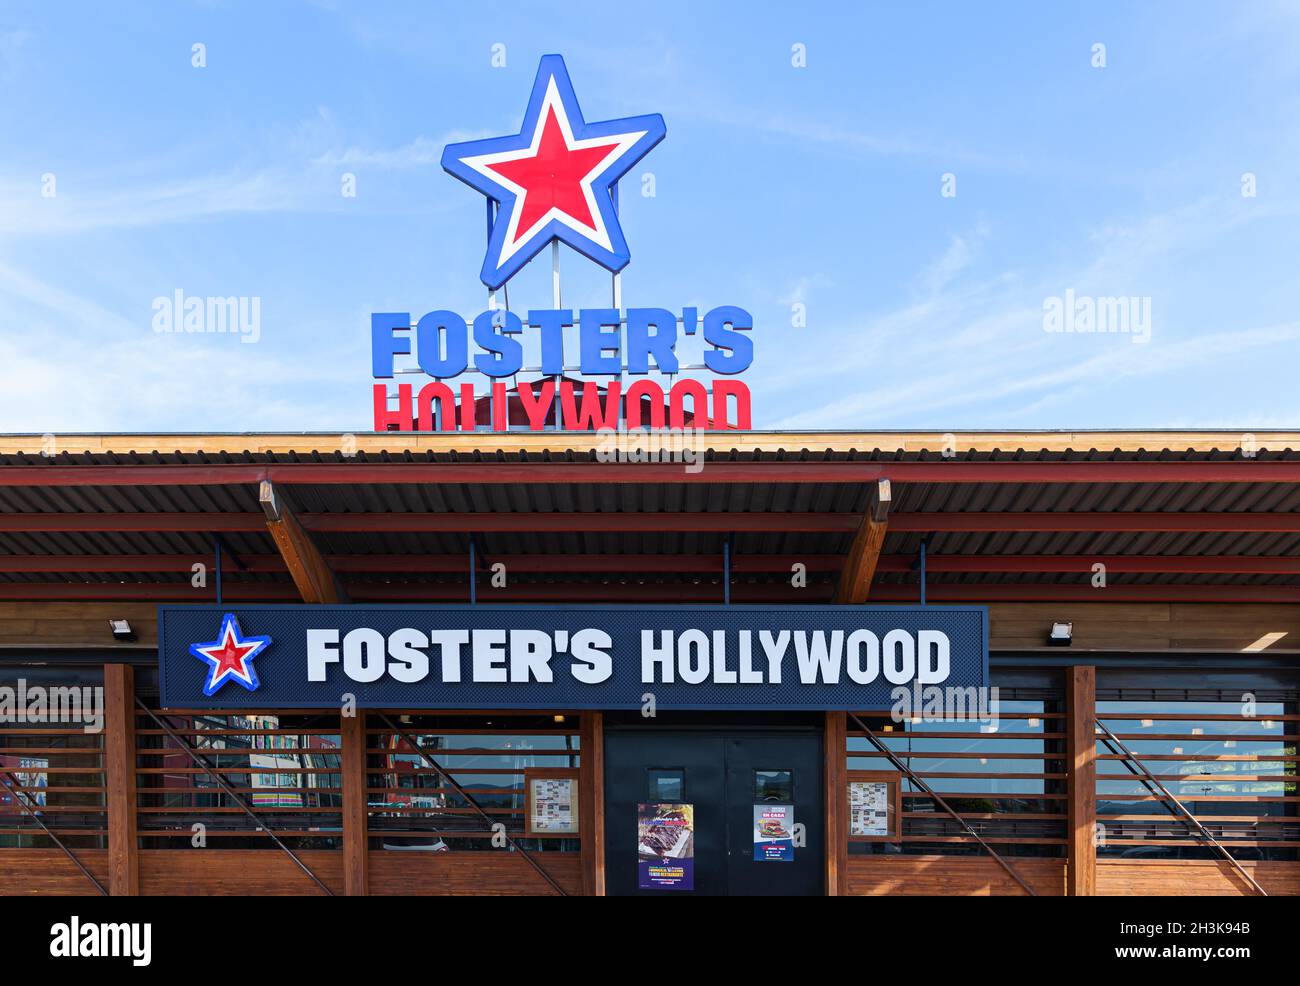 LA ELIANA, SPAIN - OCTOBER 27, 2021: Foster's Hollywood is a chain of american fast food restaurants Stock Photo